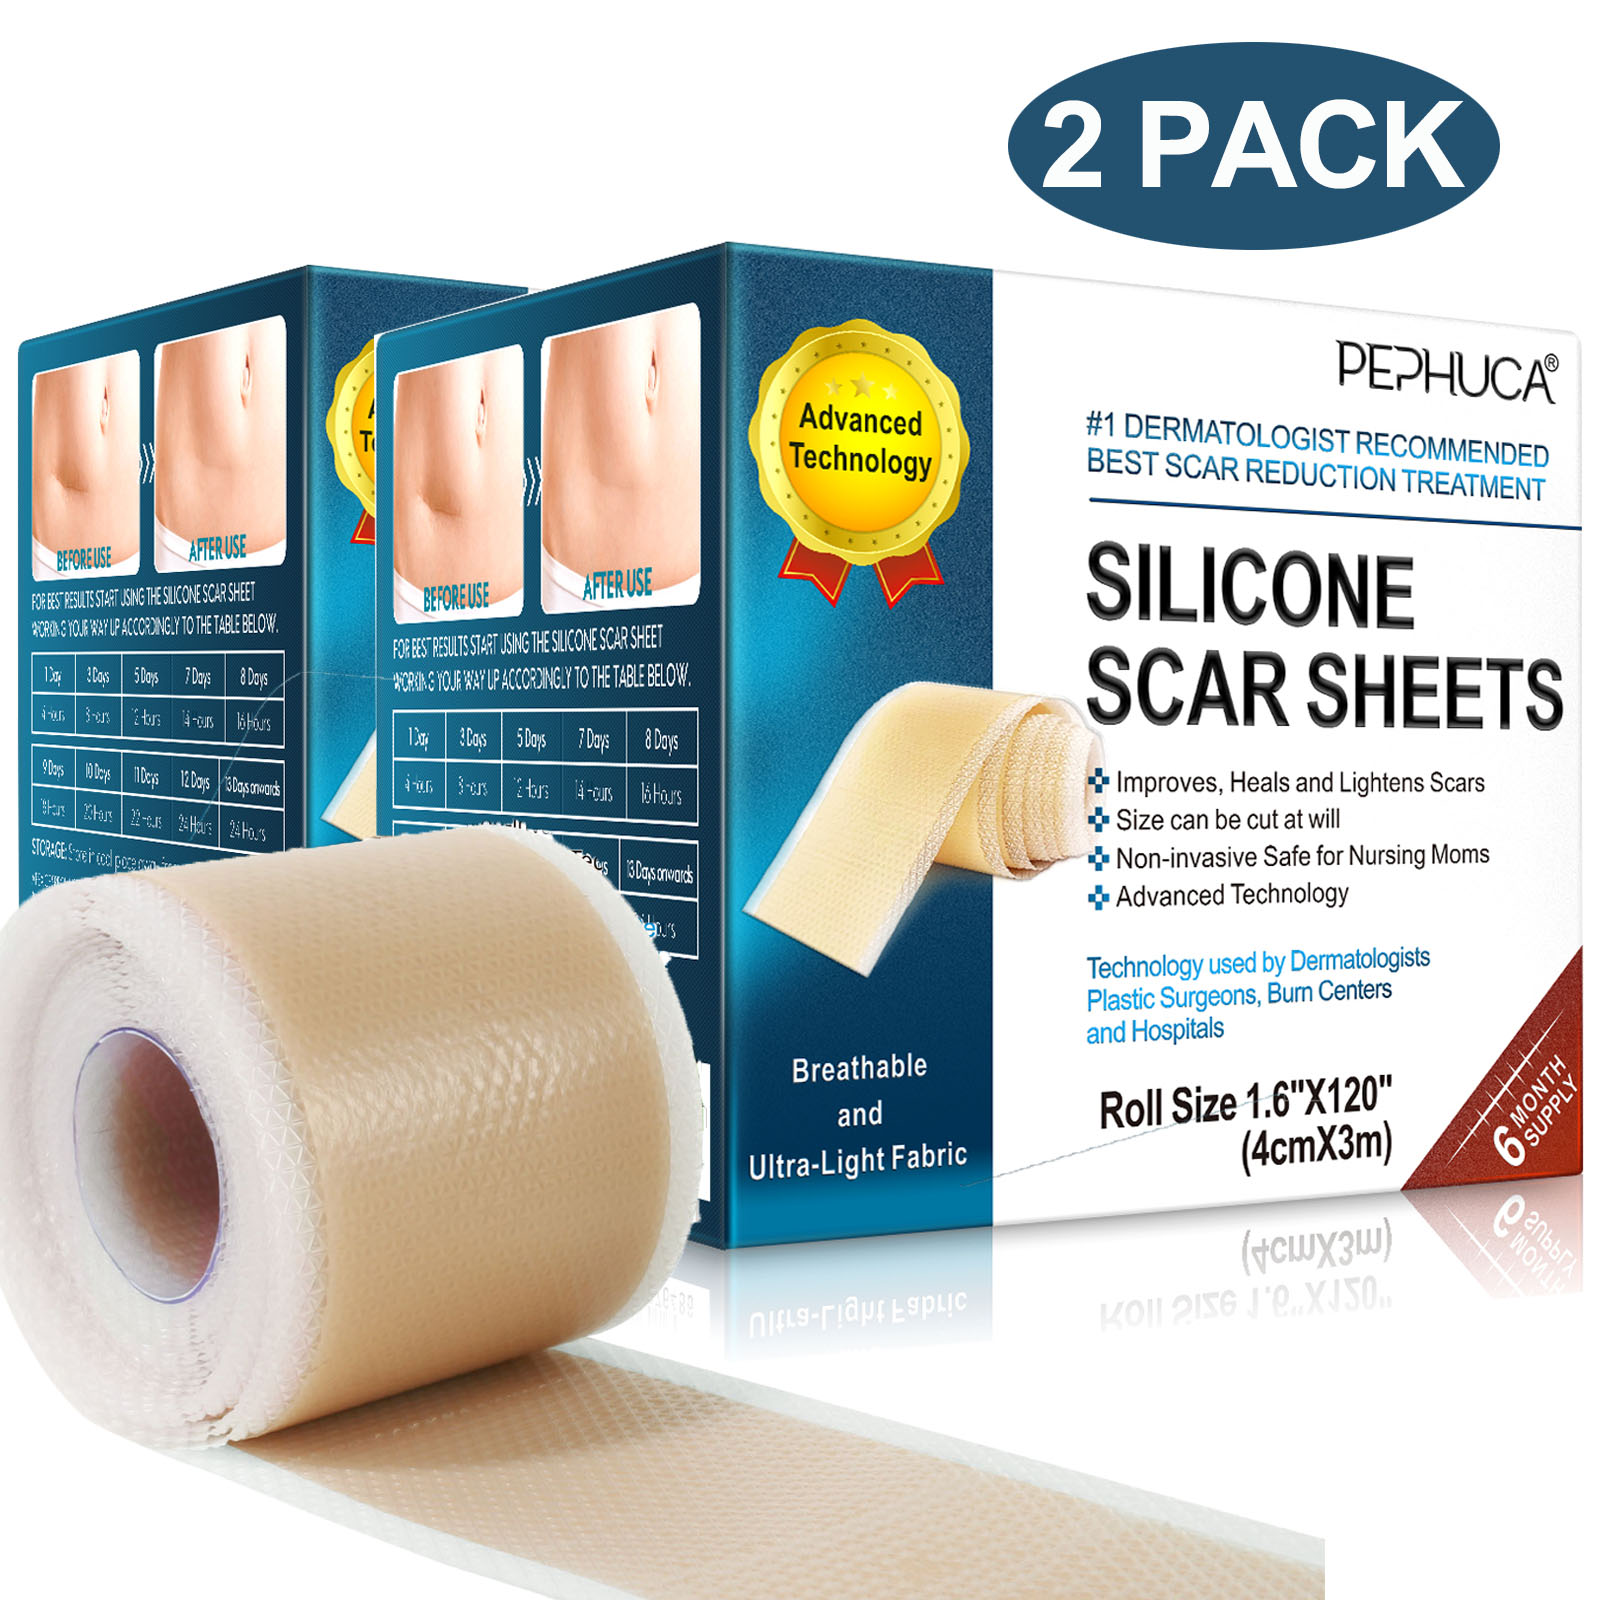 Pephuca Medical Grade Silicone Scar Sheets,Reusable and Breathable Silicone  Gel Tape for Scar Removal,120inch x 1.6inch Roll Reusable 6 Months Supply -  2 Pack 